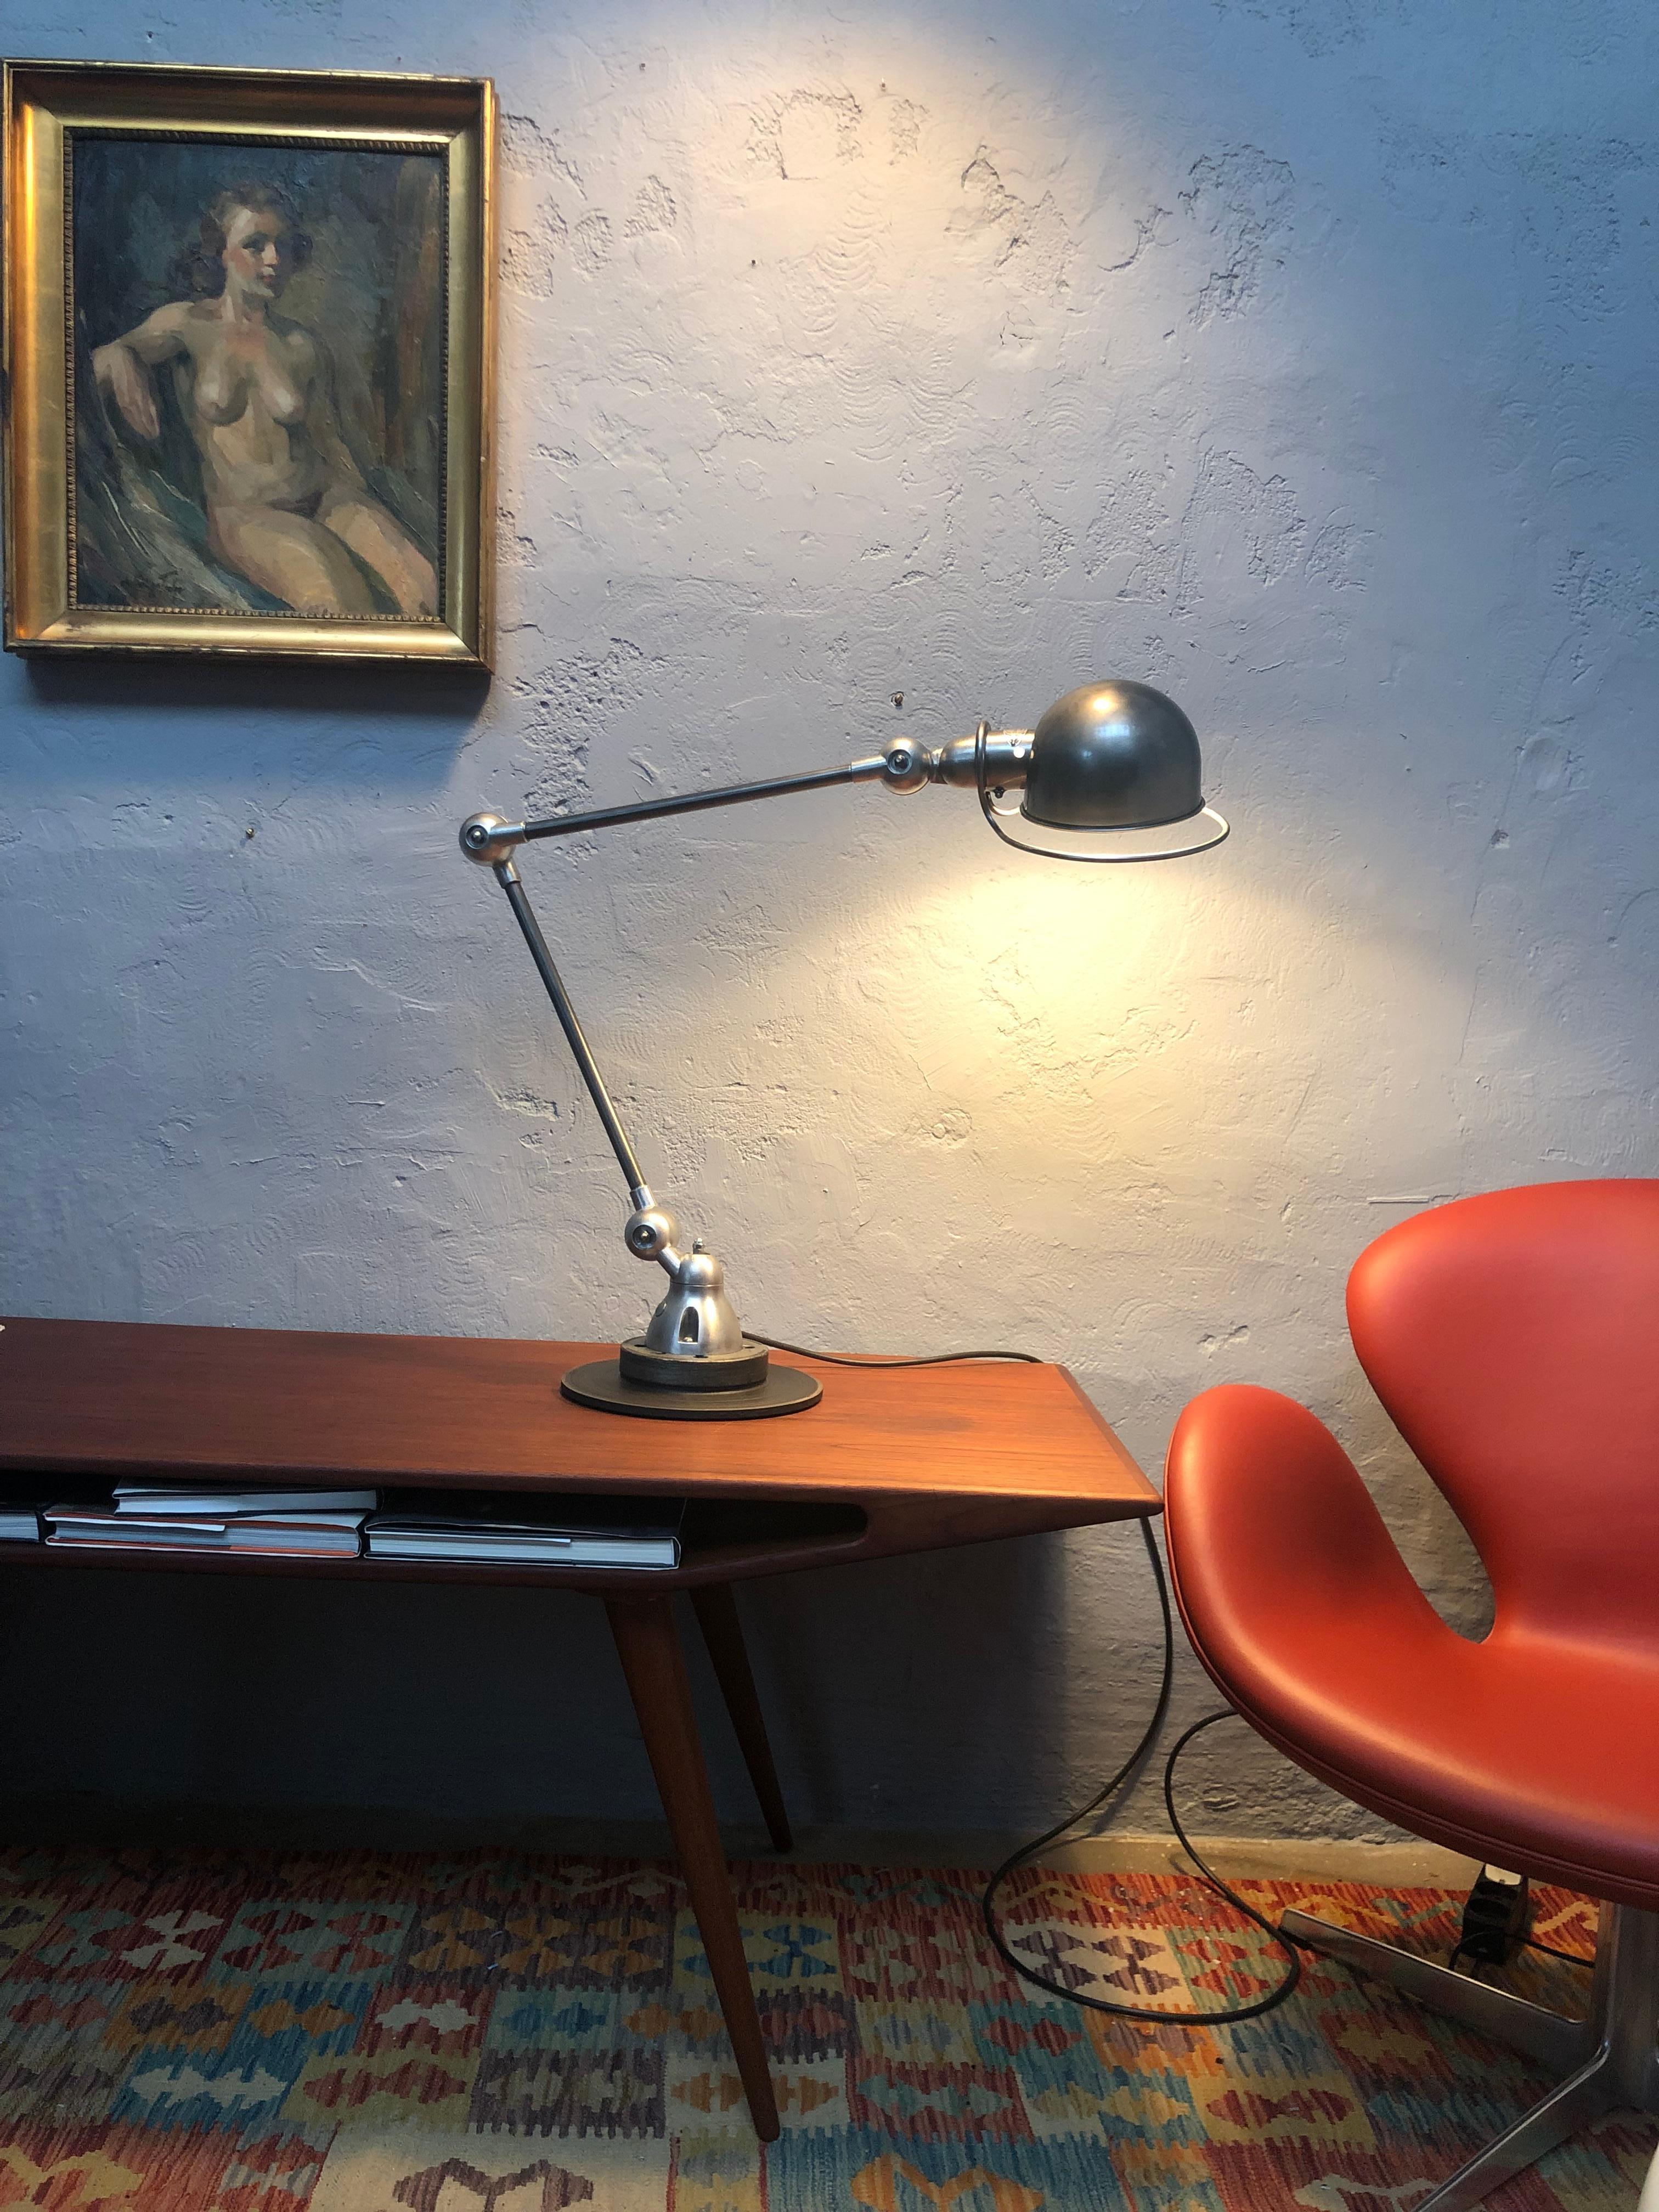 An iconic mid century 2 arm industrial work lamp by Jielde of France.
A cordless, functional lamp, ideally suited for any purpose and fully articulated,
thanks to this unique design.
With a base that can rotate 360 degrees and a reflector that can